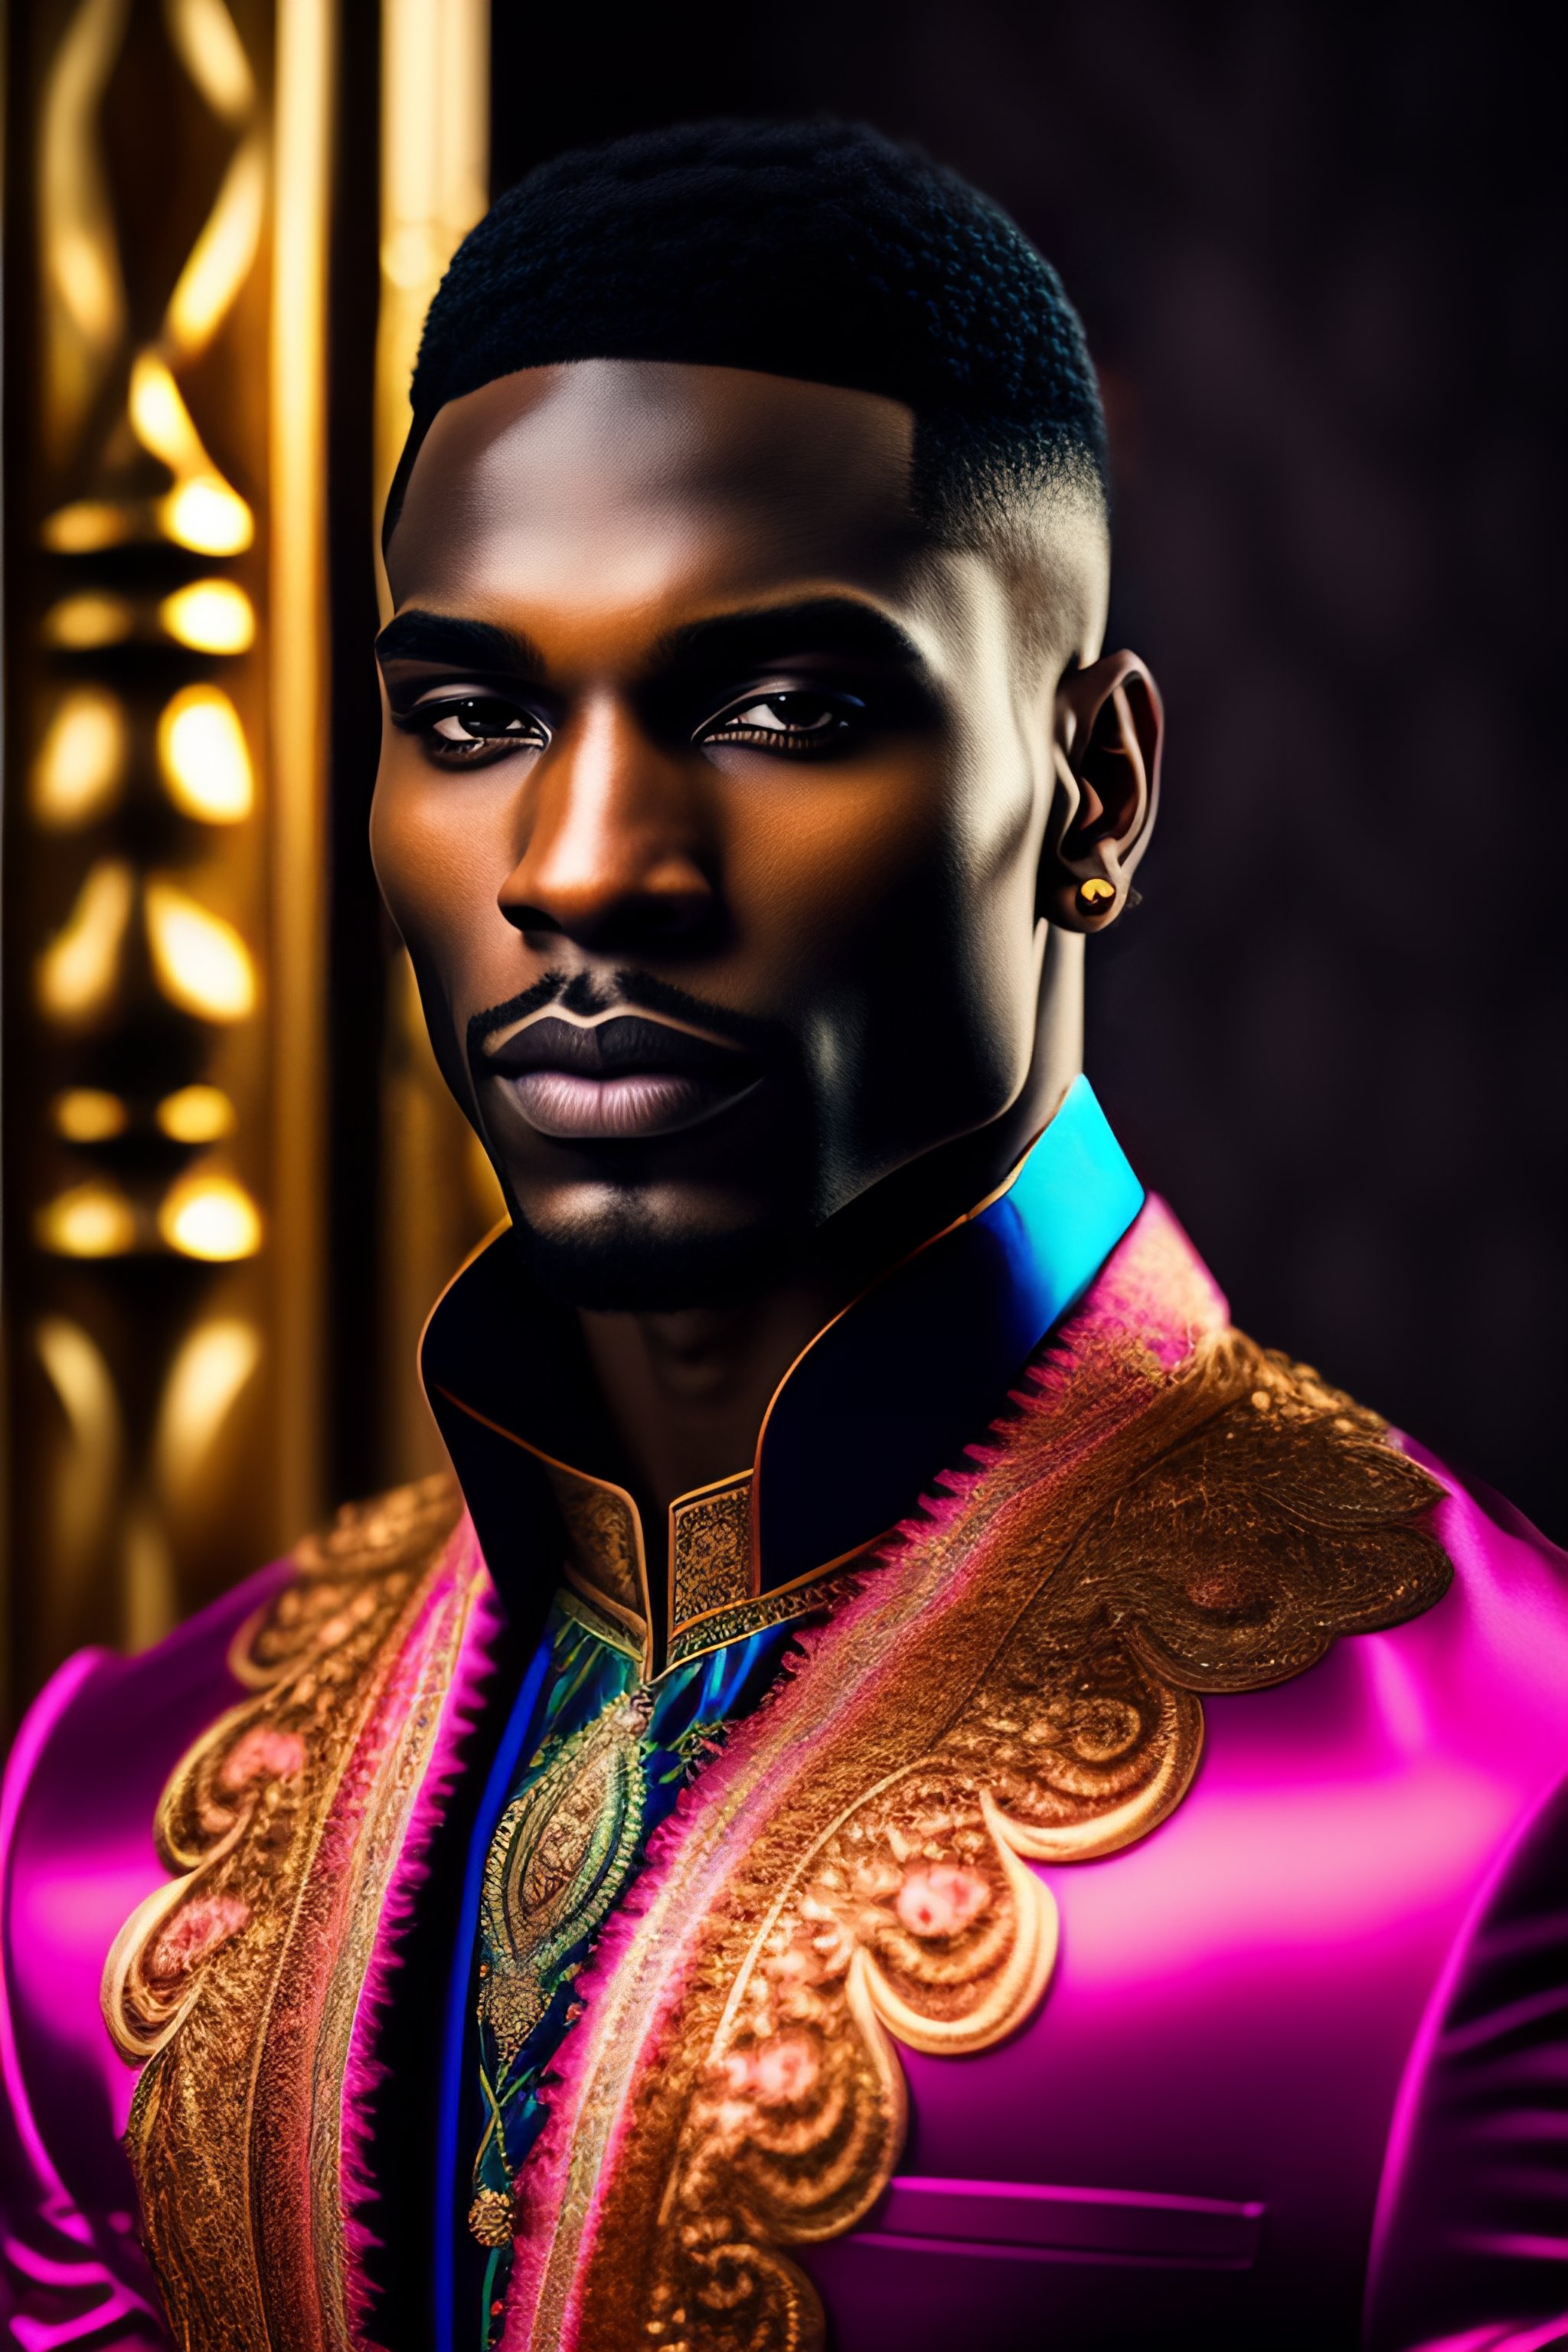 Lexica A Beautiful And Mysterious Melanated Man In An Intricate And Colorful Gown No Blur 4210